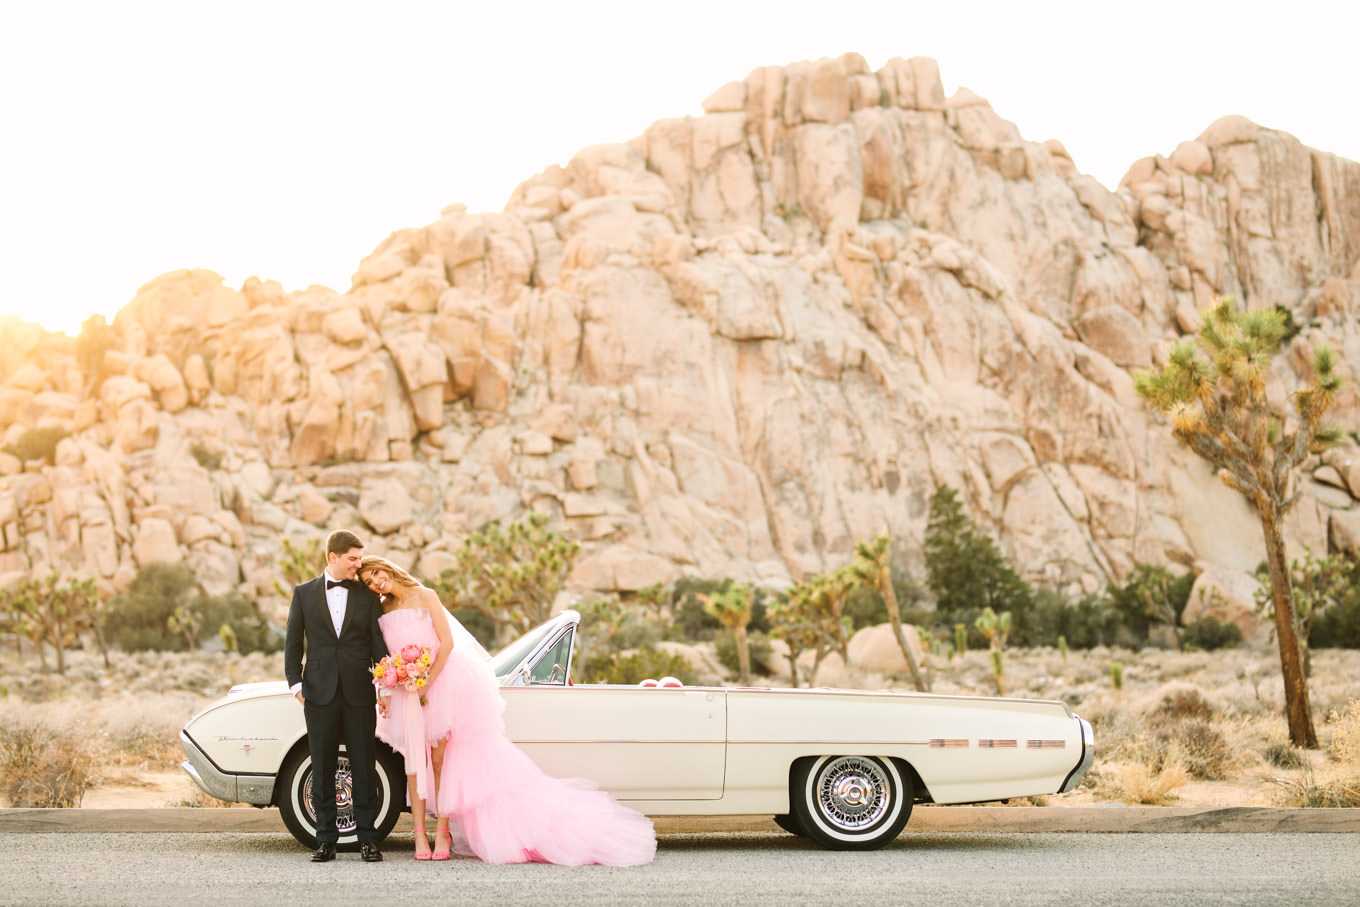 Joshua Tree pink dress elopement with classic car | Engagement, elopement, and wedding photography roundup of Mary Costa’s favorite images from 2020 | Colorful and elevated photography for fun-loving couples in Southern California | #2020wedding #elopement #weddingphoto #weddingphotography   Source: Mary Costa Photography | Los Angeles